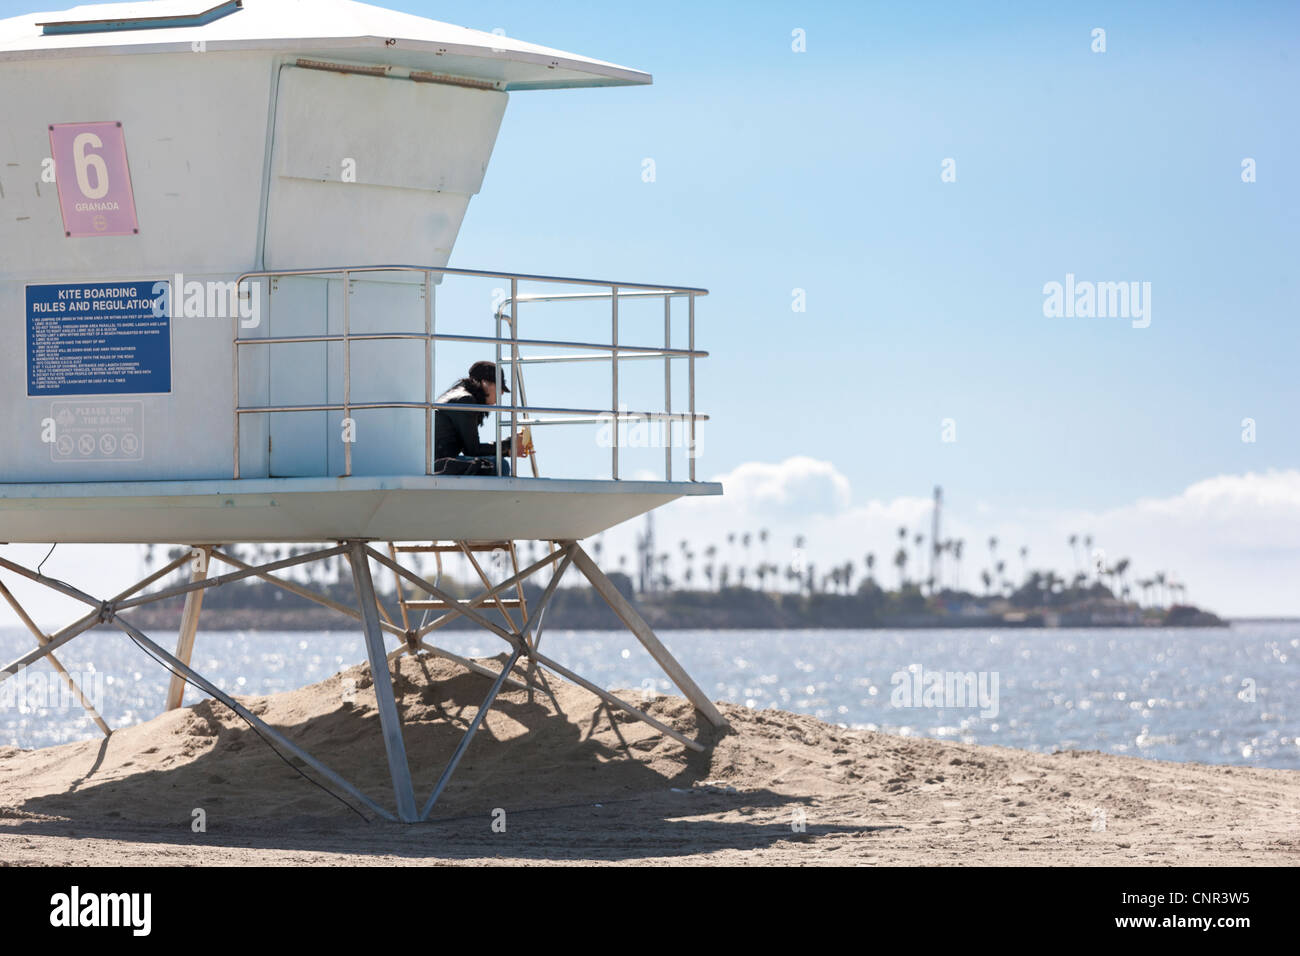 Life guard lifeguard station hut in Long Beach Ca California with Island Chaffee an offshore oil rig disguised with palm trees Stock Photo